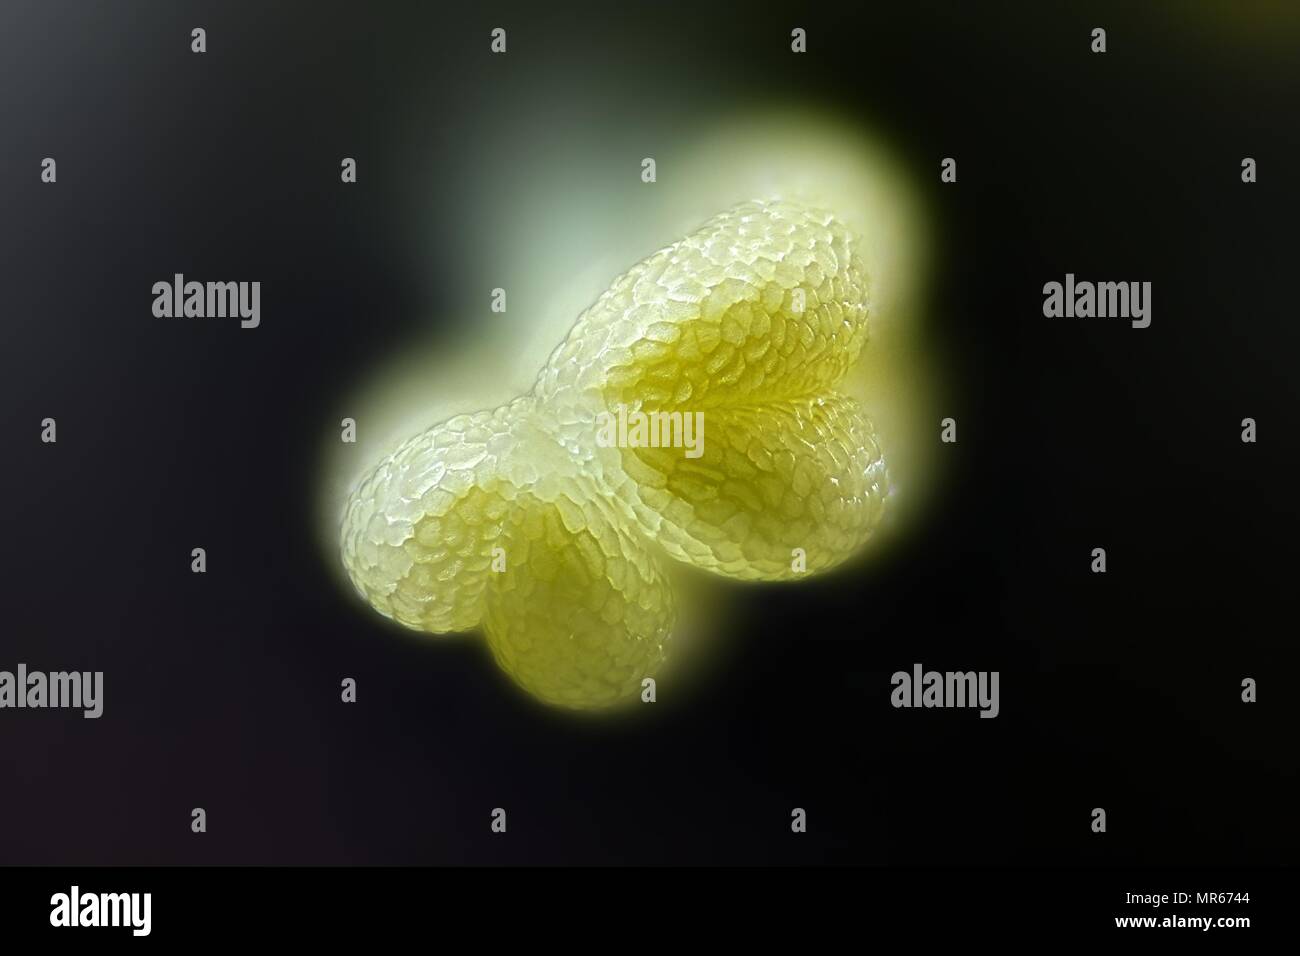 Stamen of a willow, Salix phylicifolia, a microscope image Stock Photo